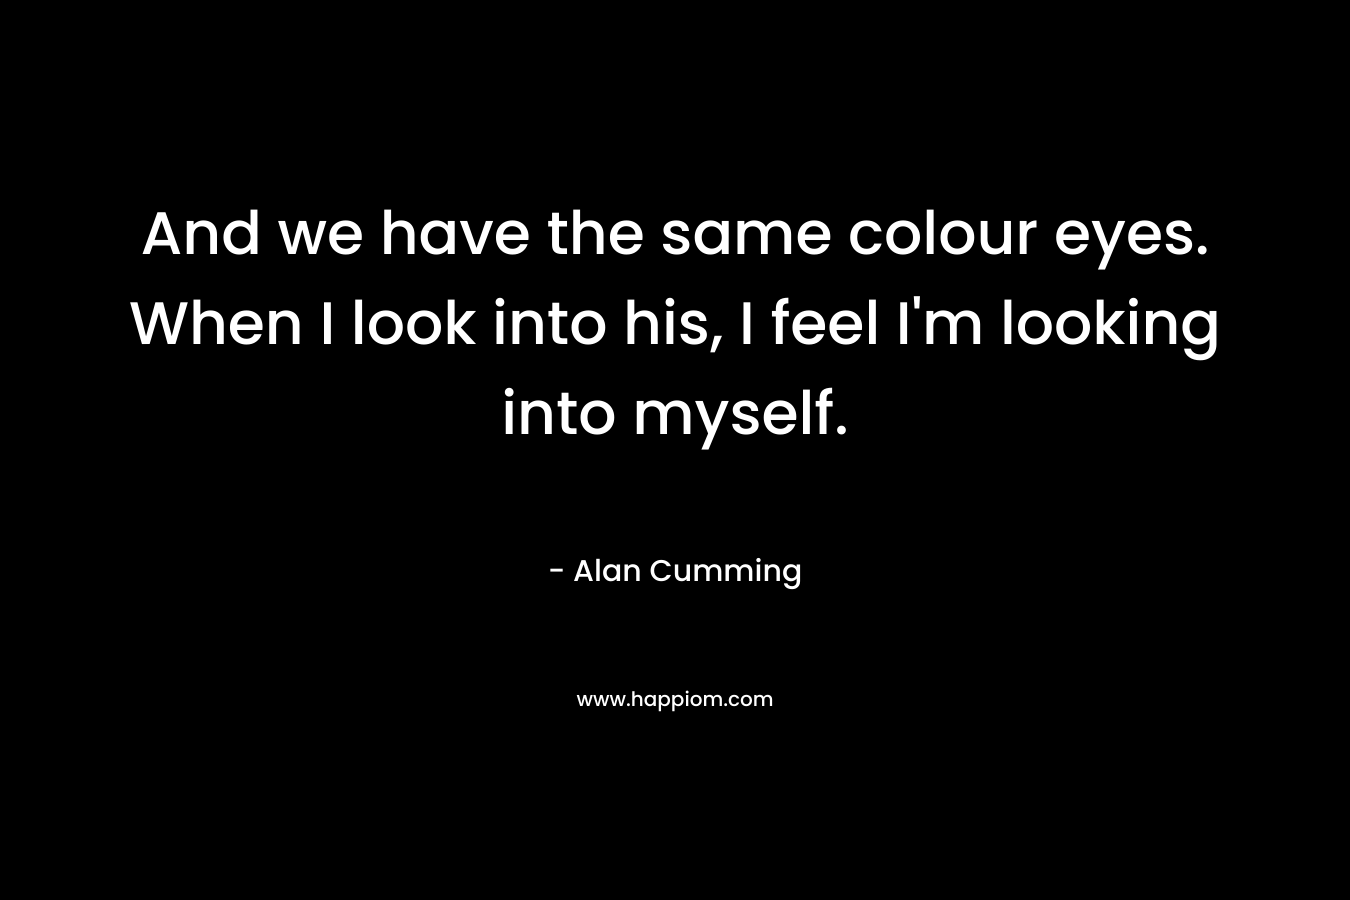 And we have the same colour eyes. When I look into his, I feel I’m looking into myself. – Alan Cumming